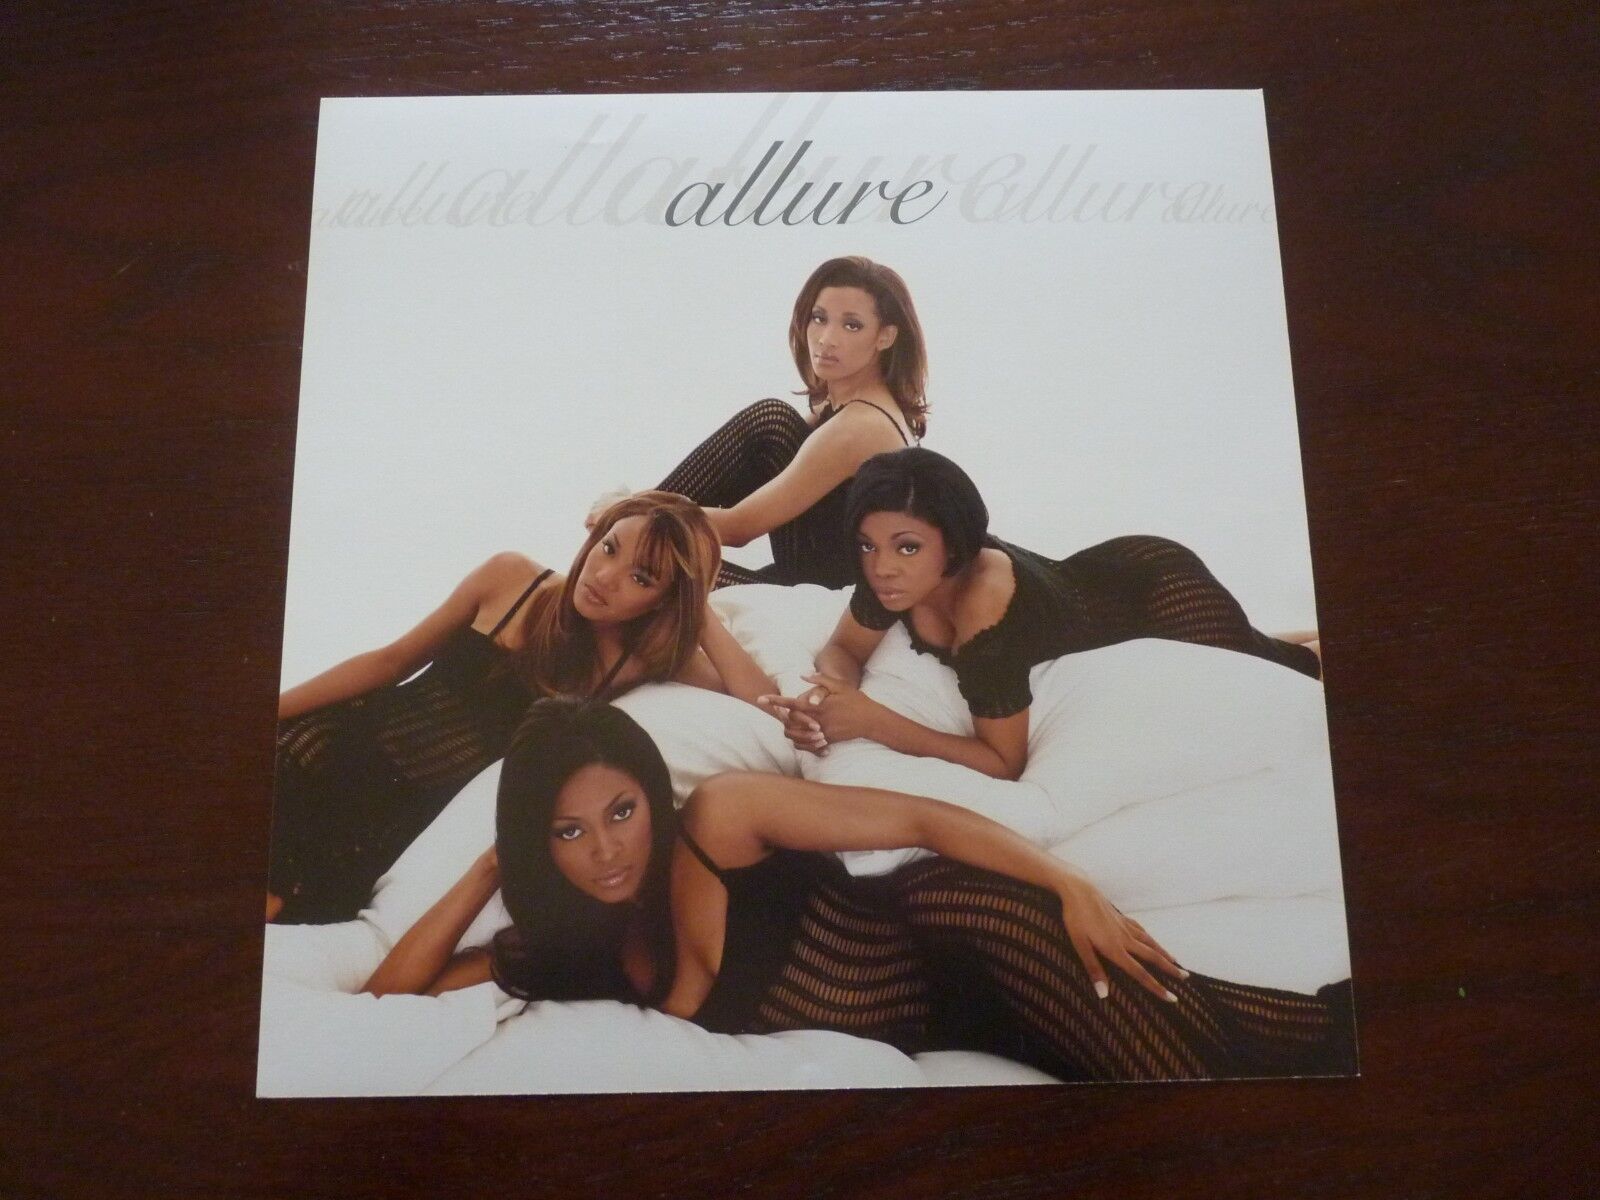 Allure 1997 Promo LP Record Photo Poster painting Flat 12x12 Poster